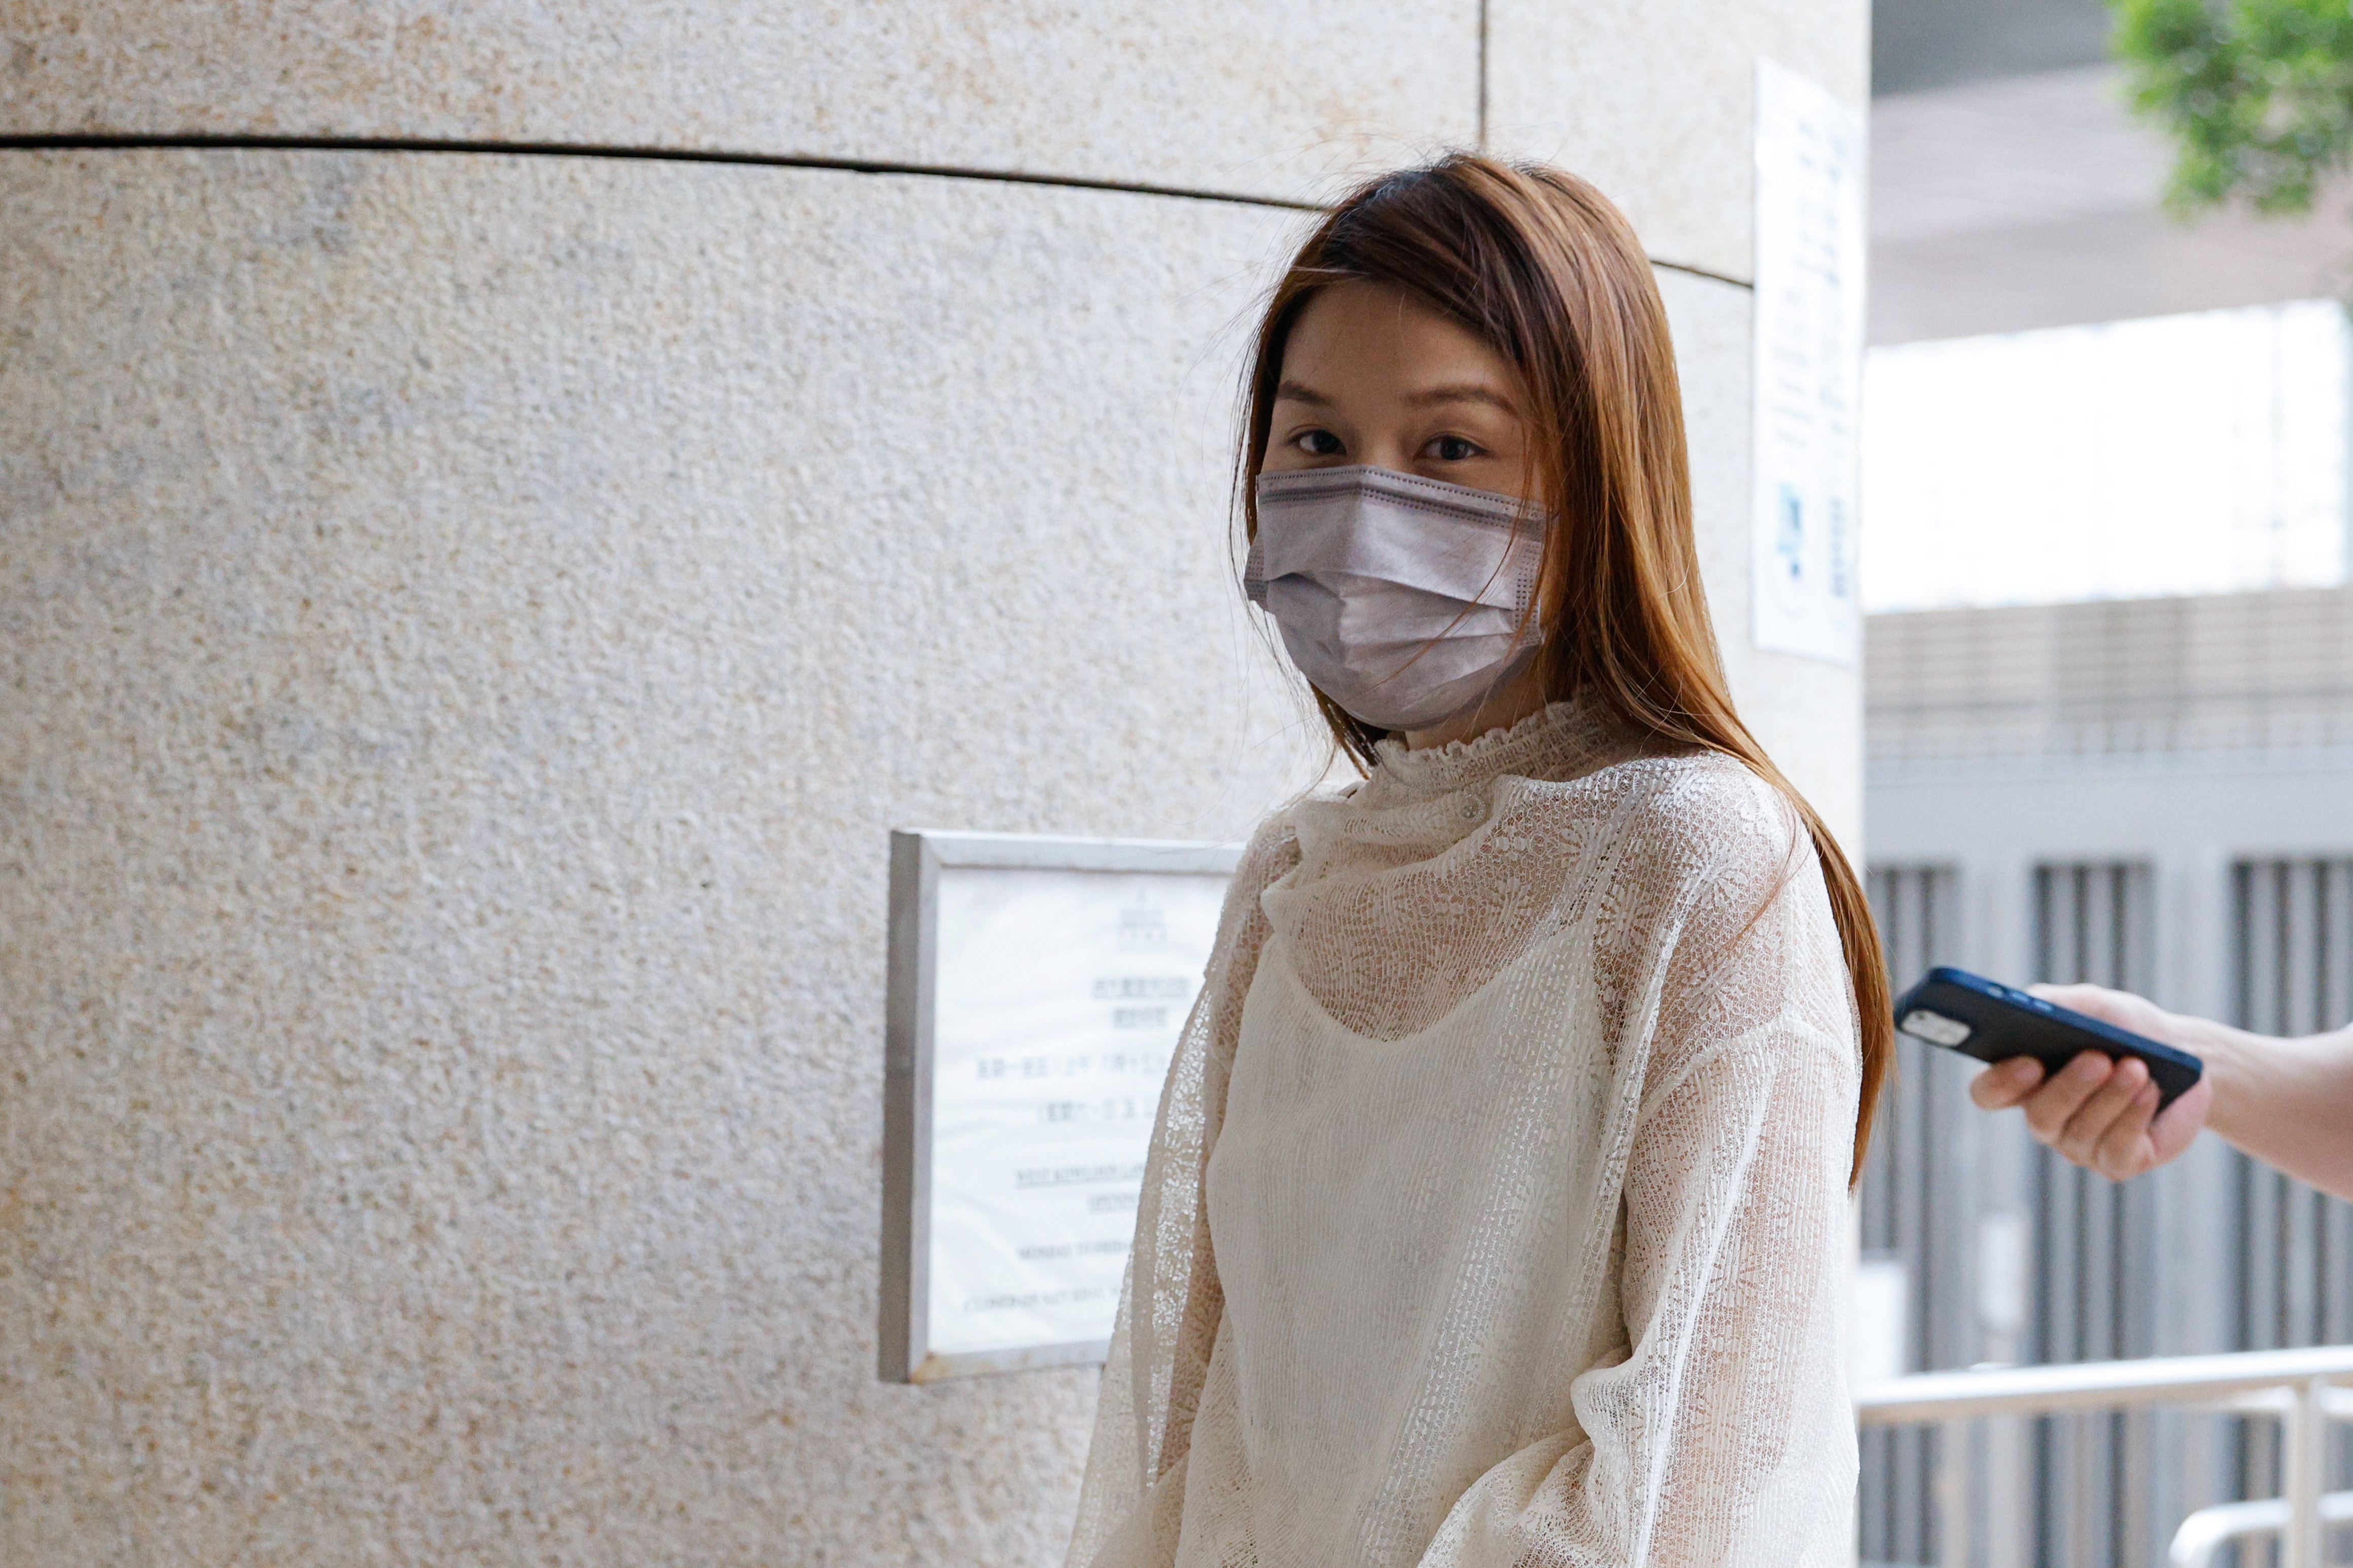 Pro-democracy activist Clarisse Yeung Suet-ying, one of the 47 pro-democracy activists charged with conspiracy to commit subversion under the national security law, arrives West Kowloon Magistrates's Courts building, in Hong Kong